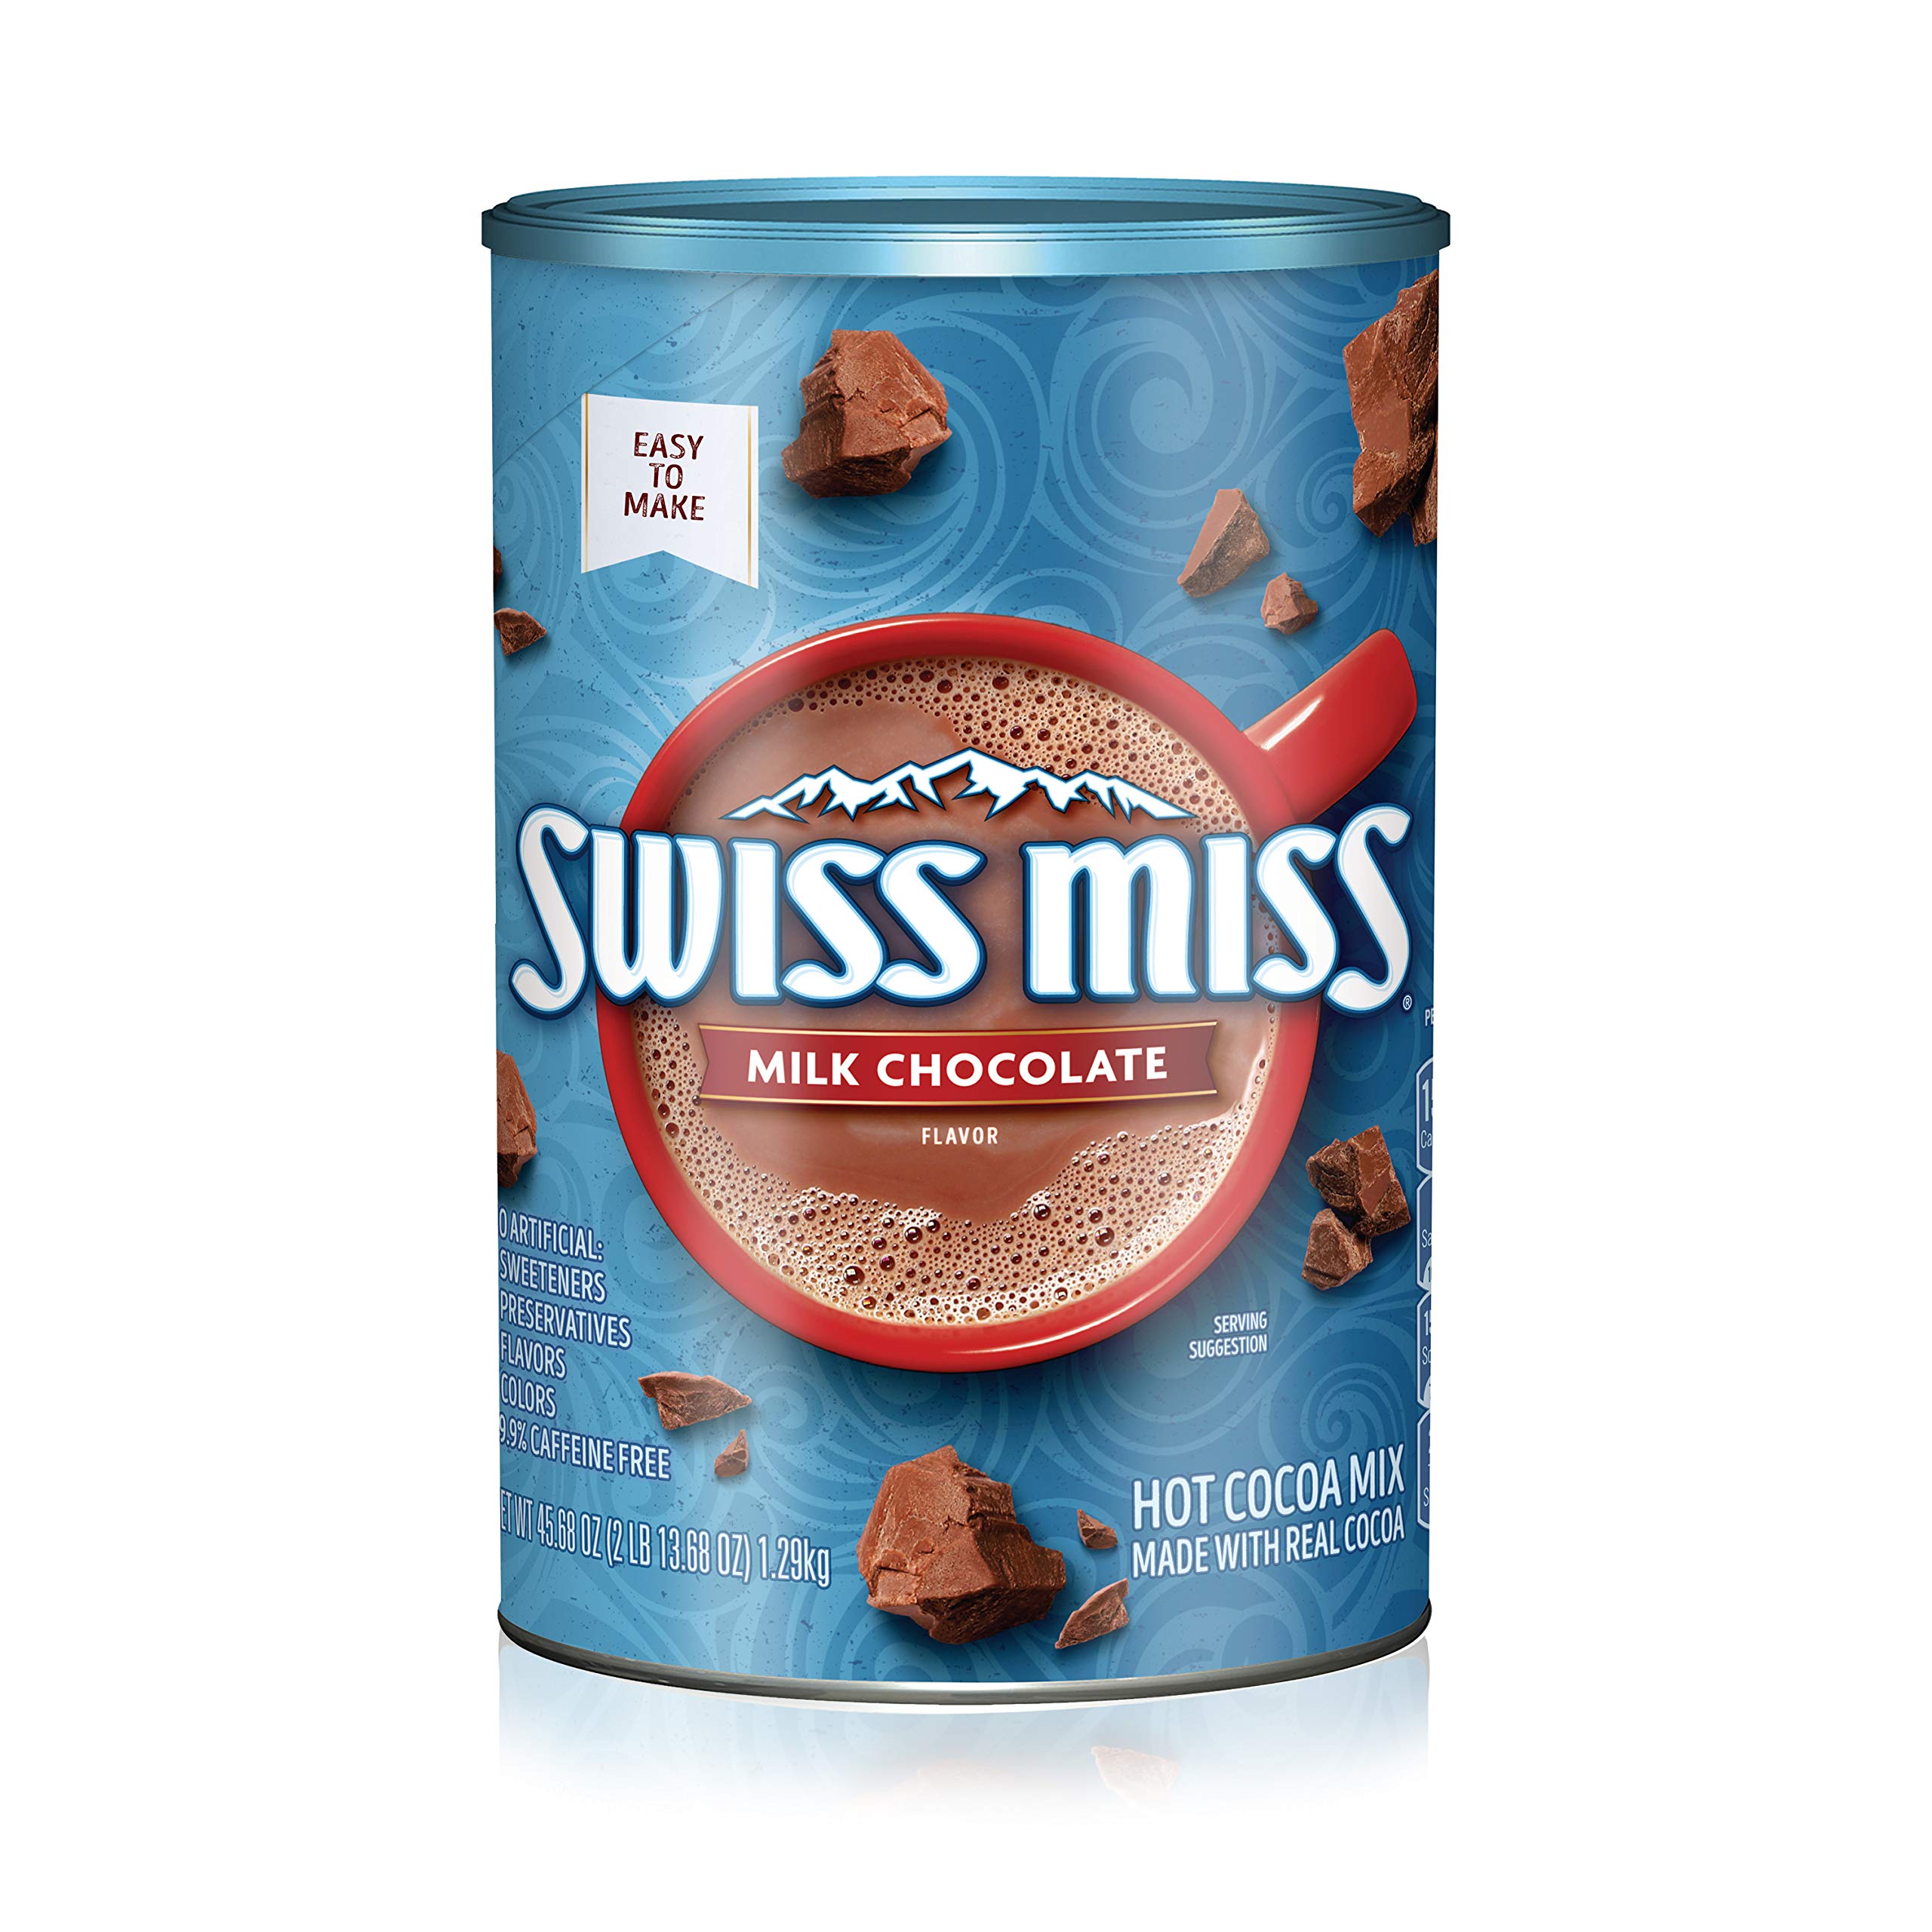 Swiss Miss Milk Chocolate Cocoa Mix With Marshmallow Lovers